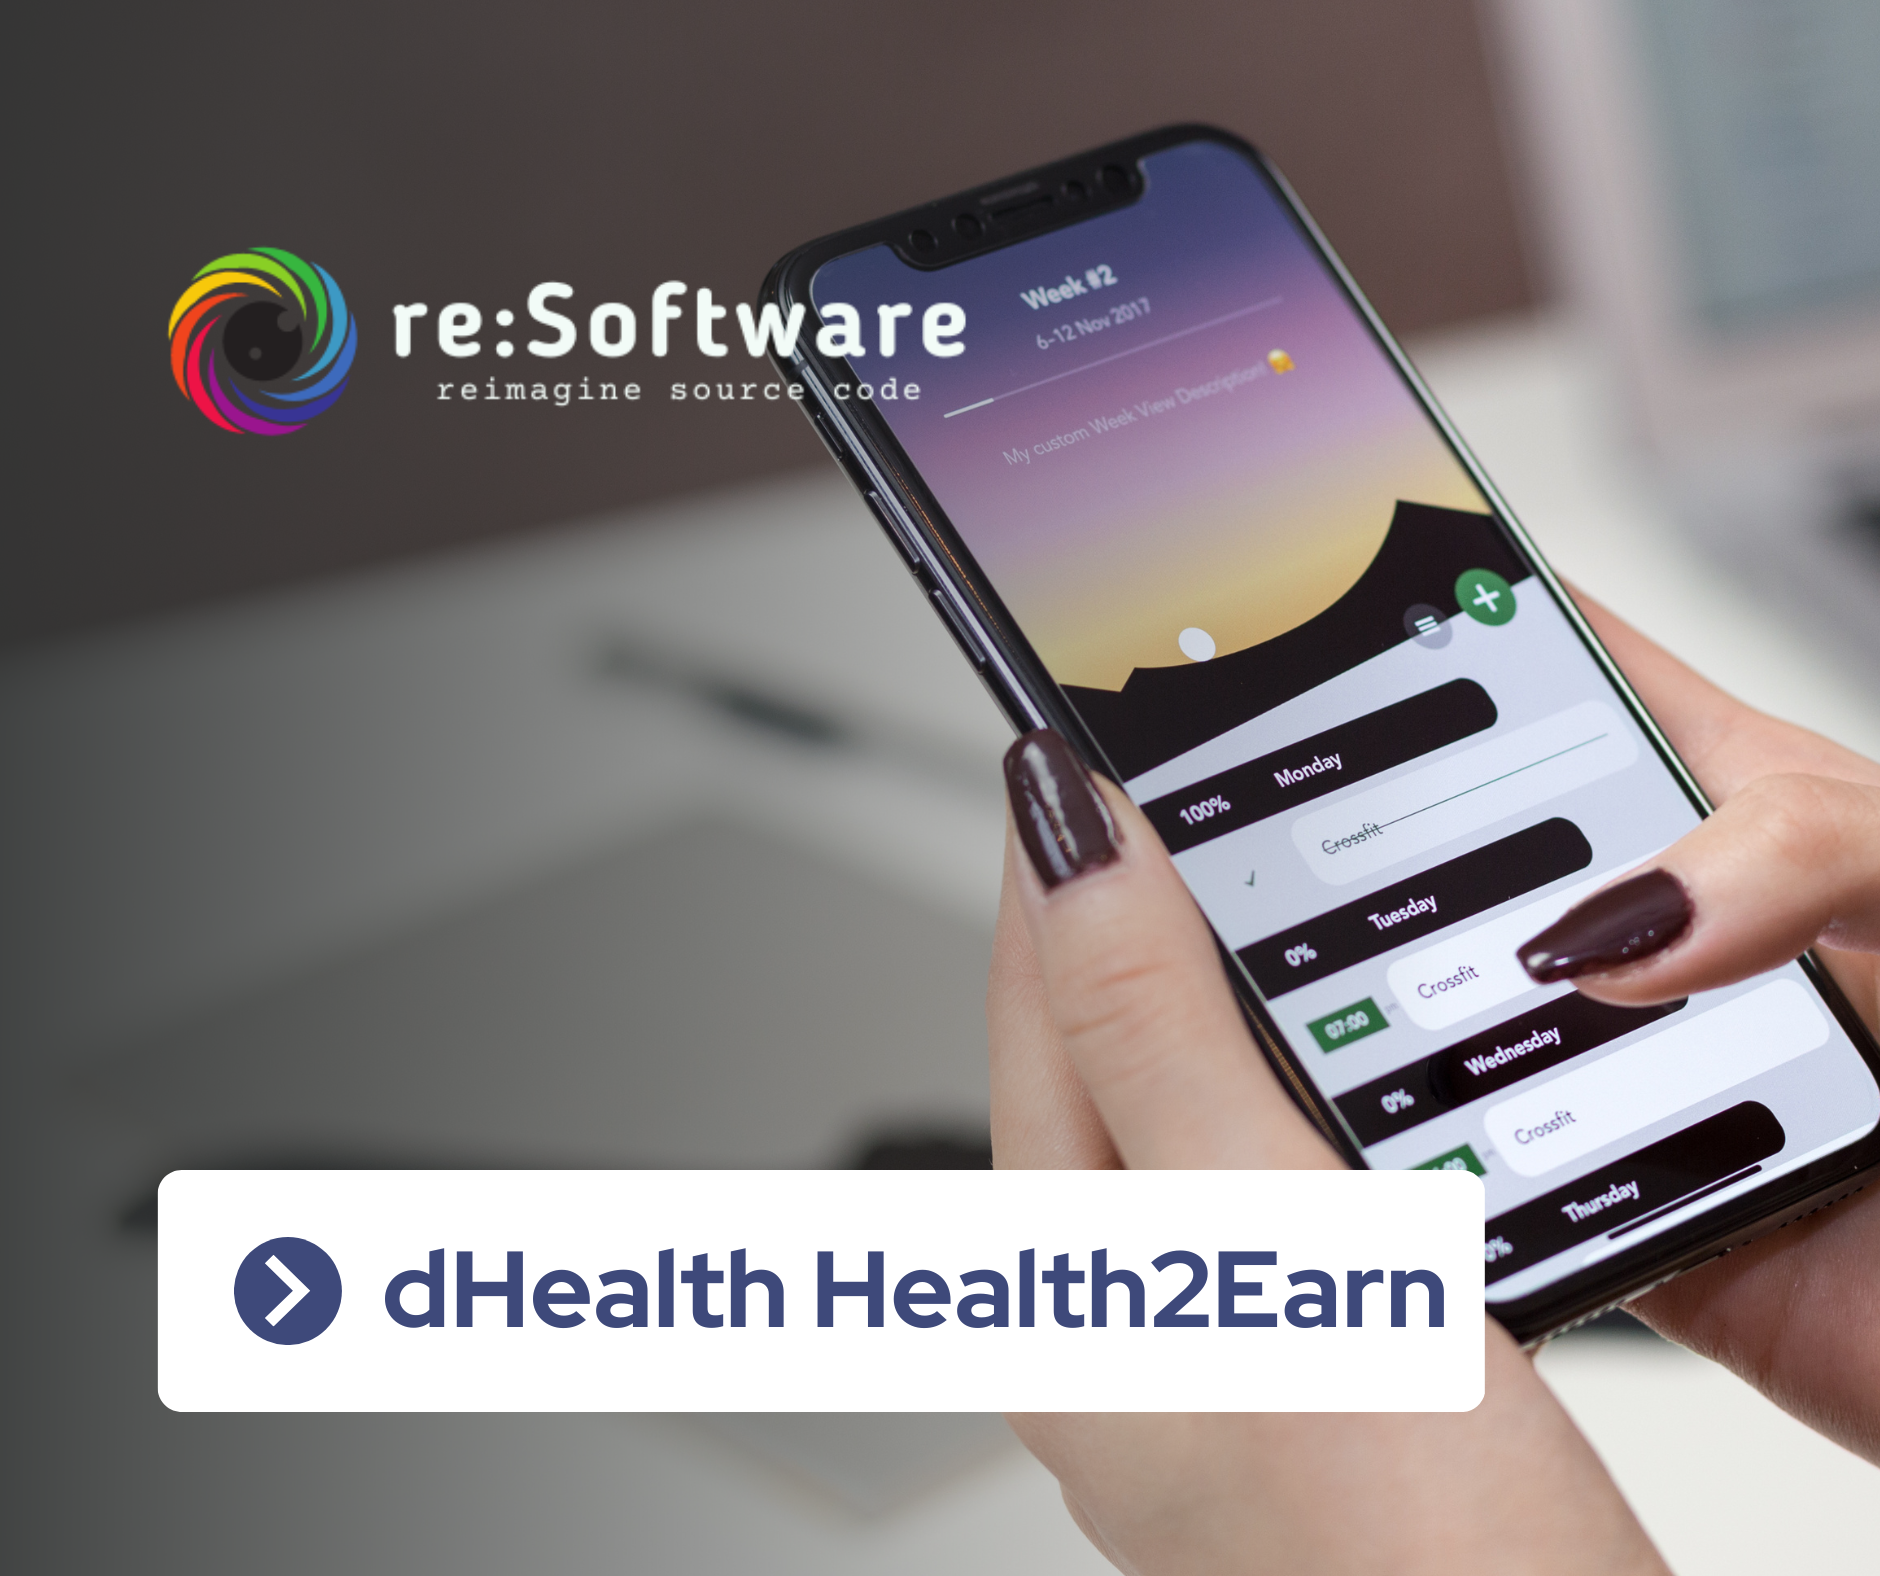 dHealth Health2Earn by re:Software S.L.